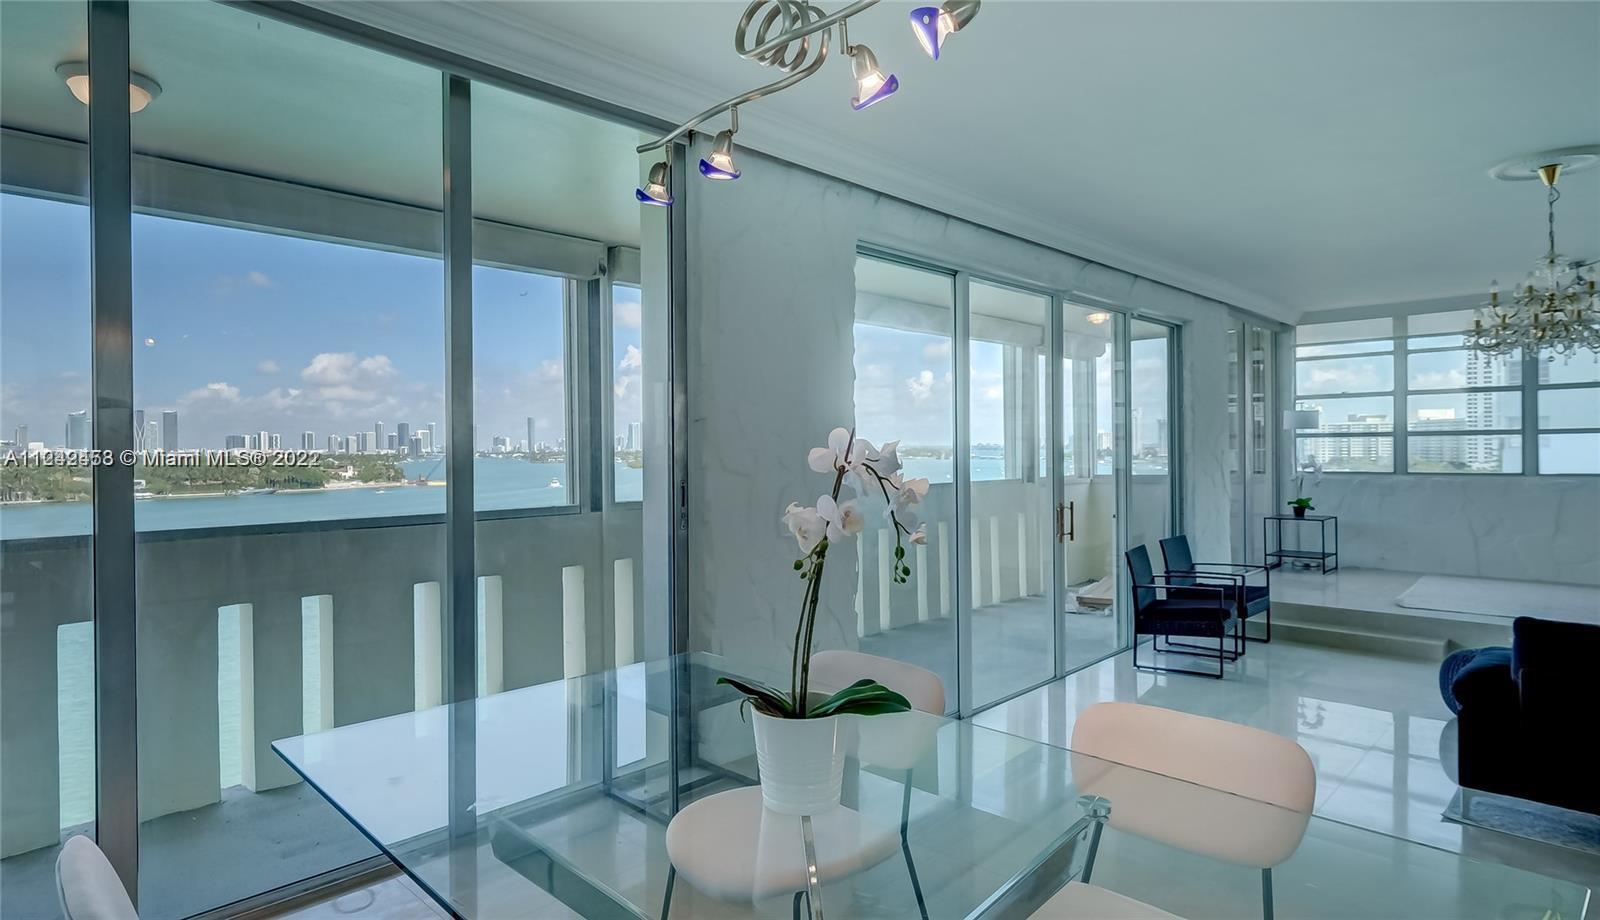 Direct Water View, Oversized Terrace, Full of Natural Light. This Corner Penthouse will make you enjoy unforgettable sunsets, with the bay and skyline right in front of your eyes. Large spaces throughout the unit, Extensive Terrace with exceptional views directly on the water, for your outdoor dining in the wonderful Miami weather looking the sunset. Full amenities Building, Pool area recently renovated, Gym, Jacuzzi, Barbecue Area, and a Private Dock with the condo just below the building, available with an additional monthly rent. Everything you need for enjoying South Beach.